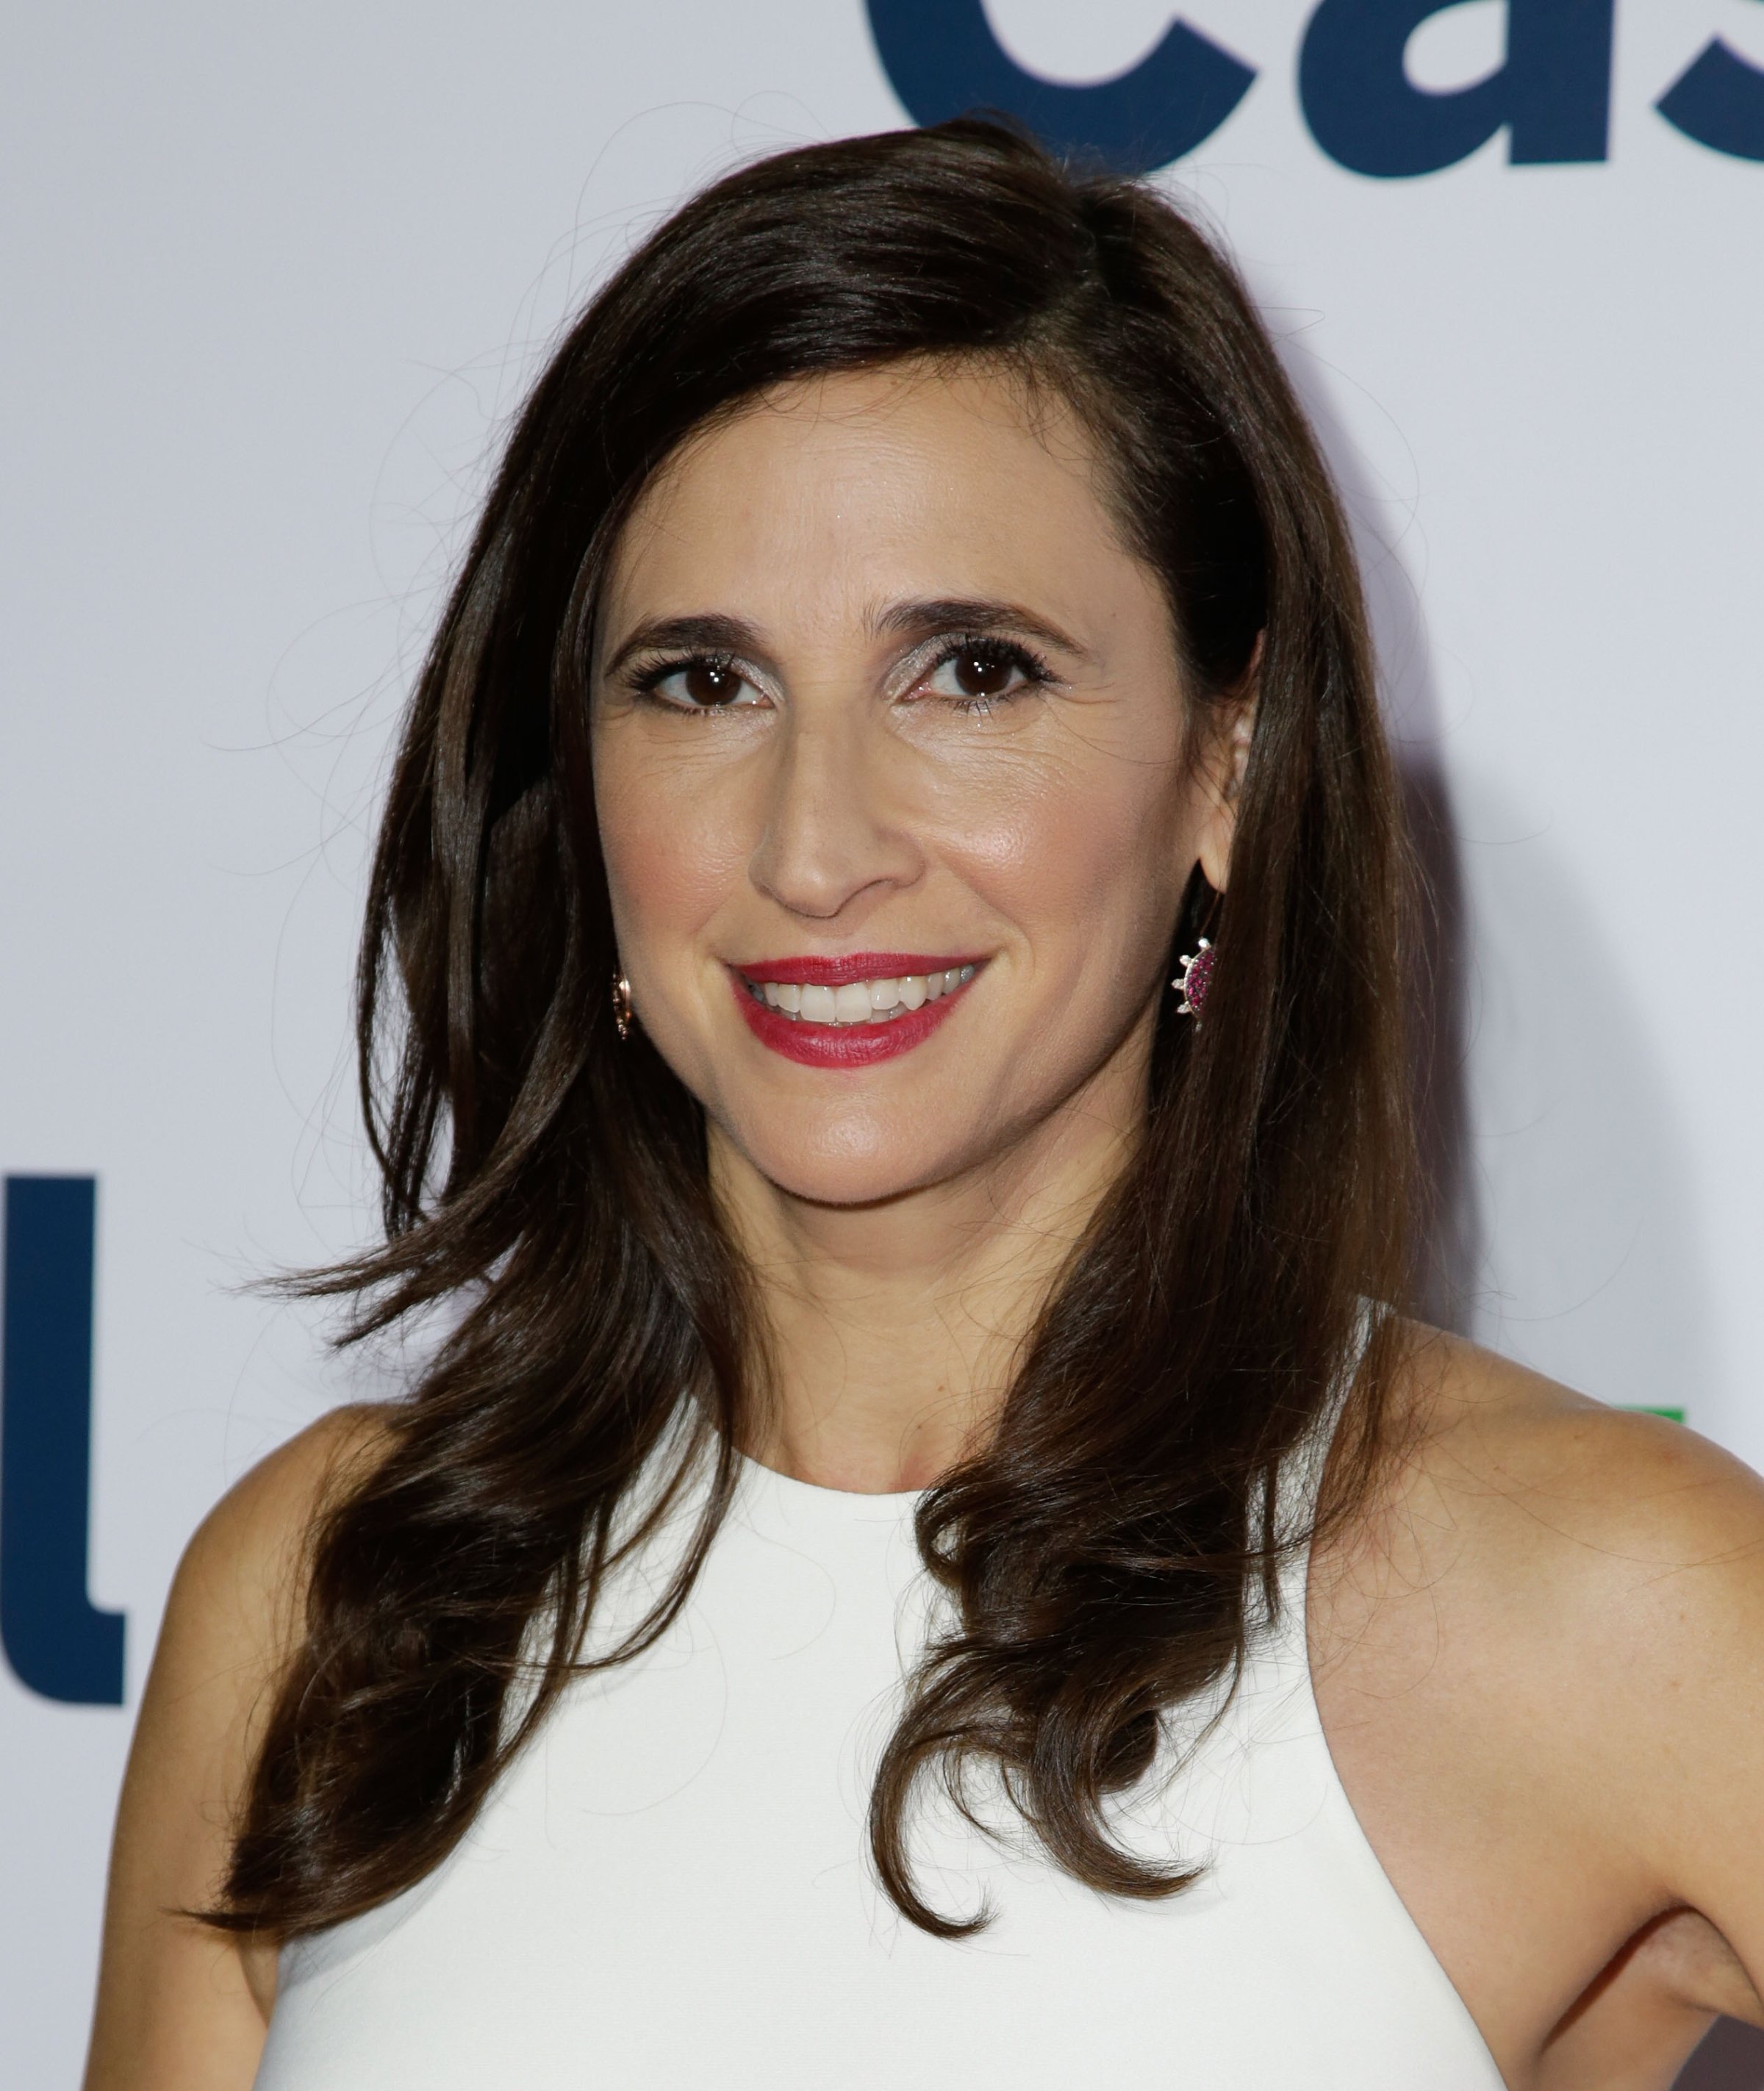 Michaela Watkins attends the premiere of Hulu's "Casual" on September 21, 2015 in West Hollywood, California.